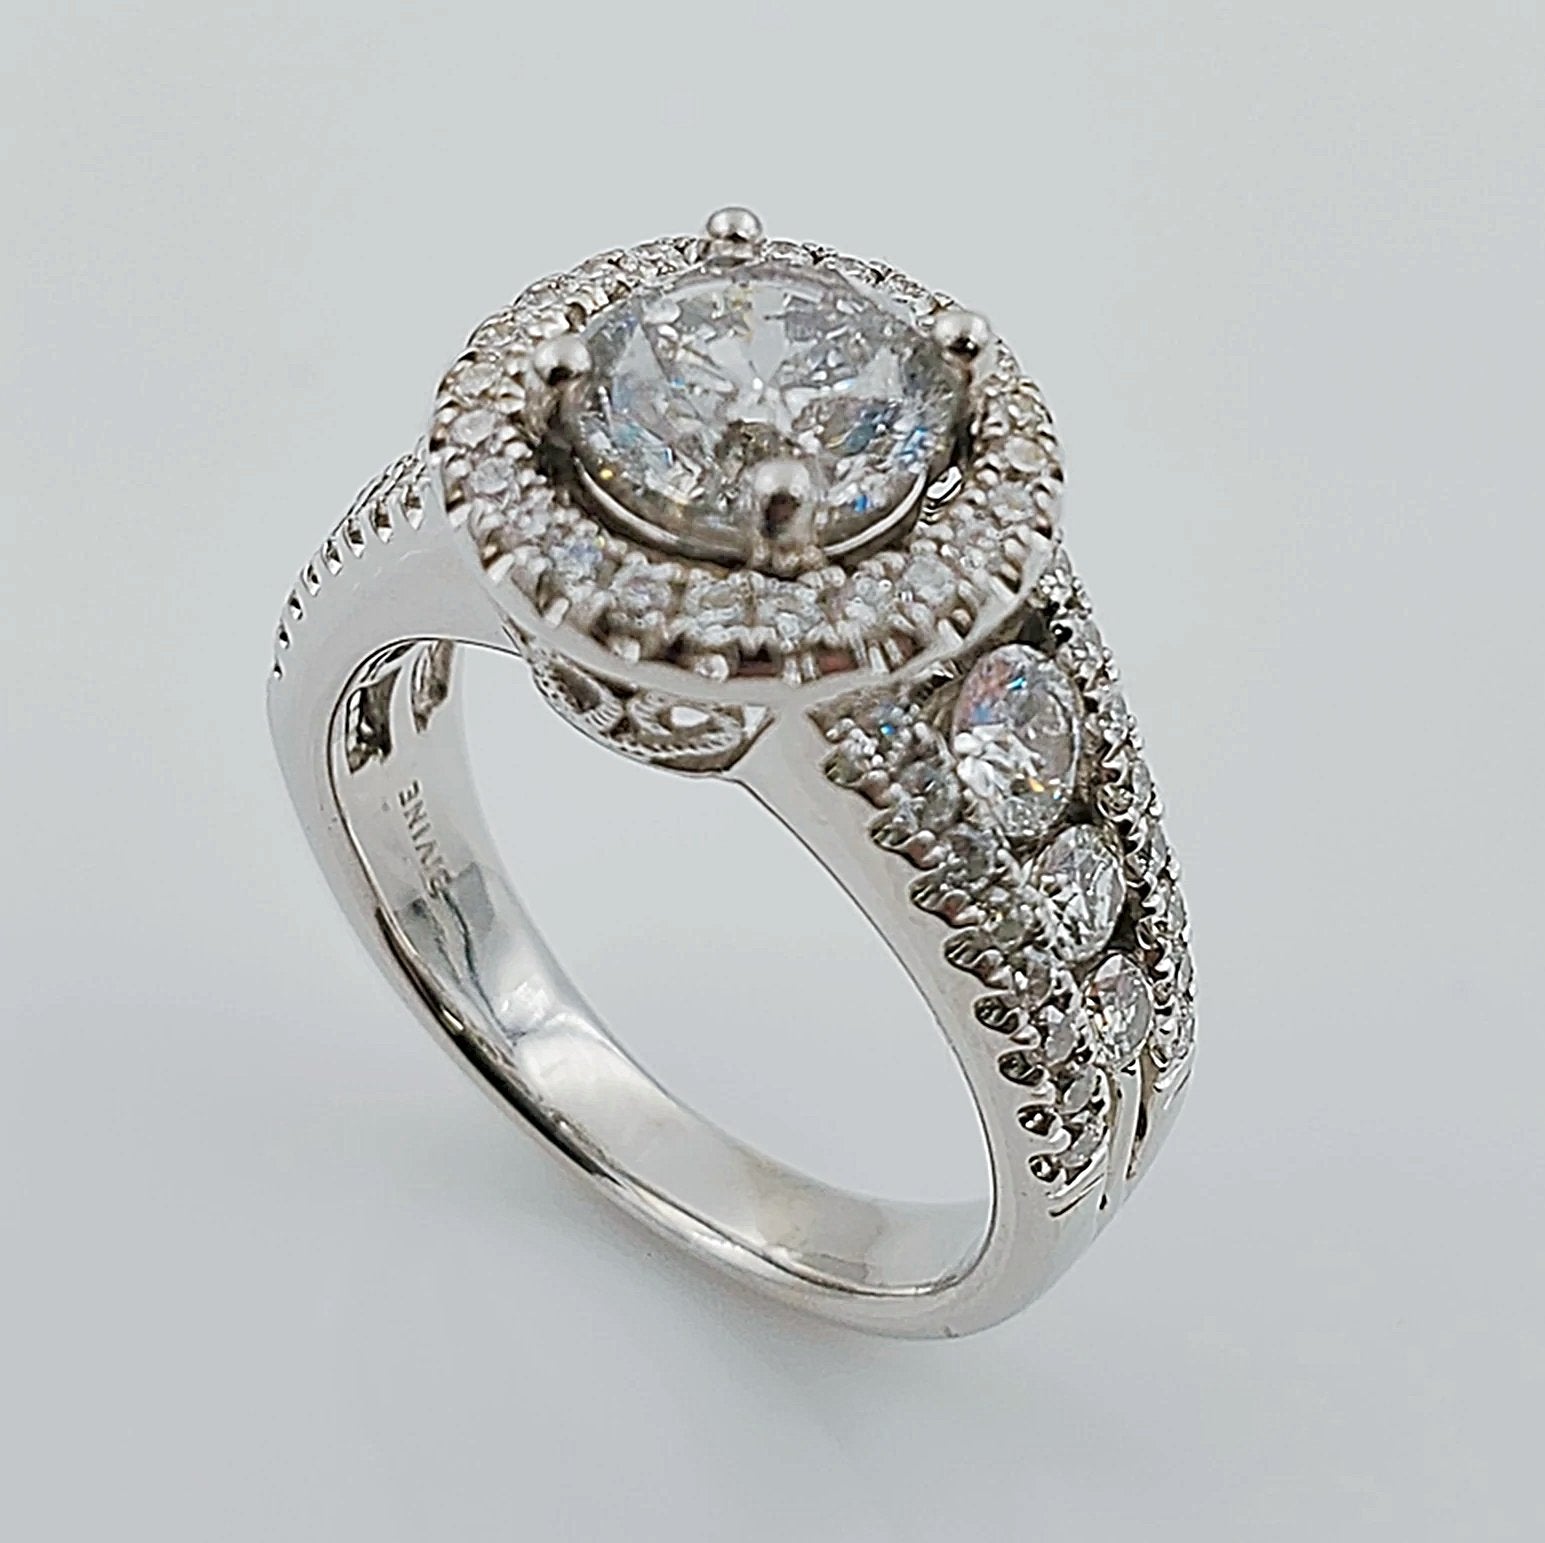 Women's 14K White Gold with 1.00 CT Round Diamond (I2 Color I) 5.0 GR Total Weight Wedding Ring. (Size: 4.75)